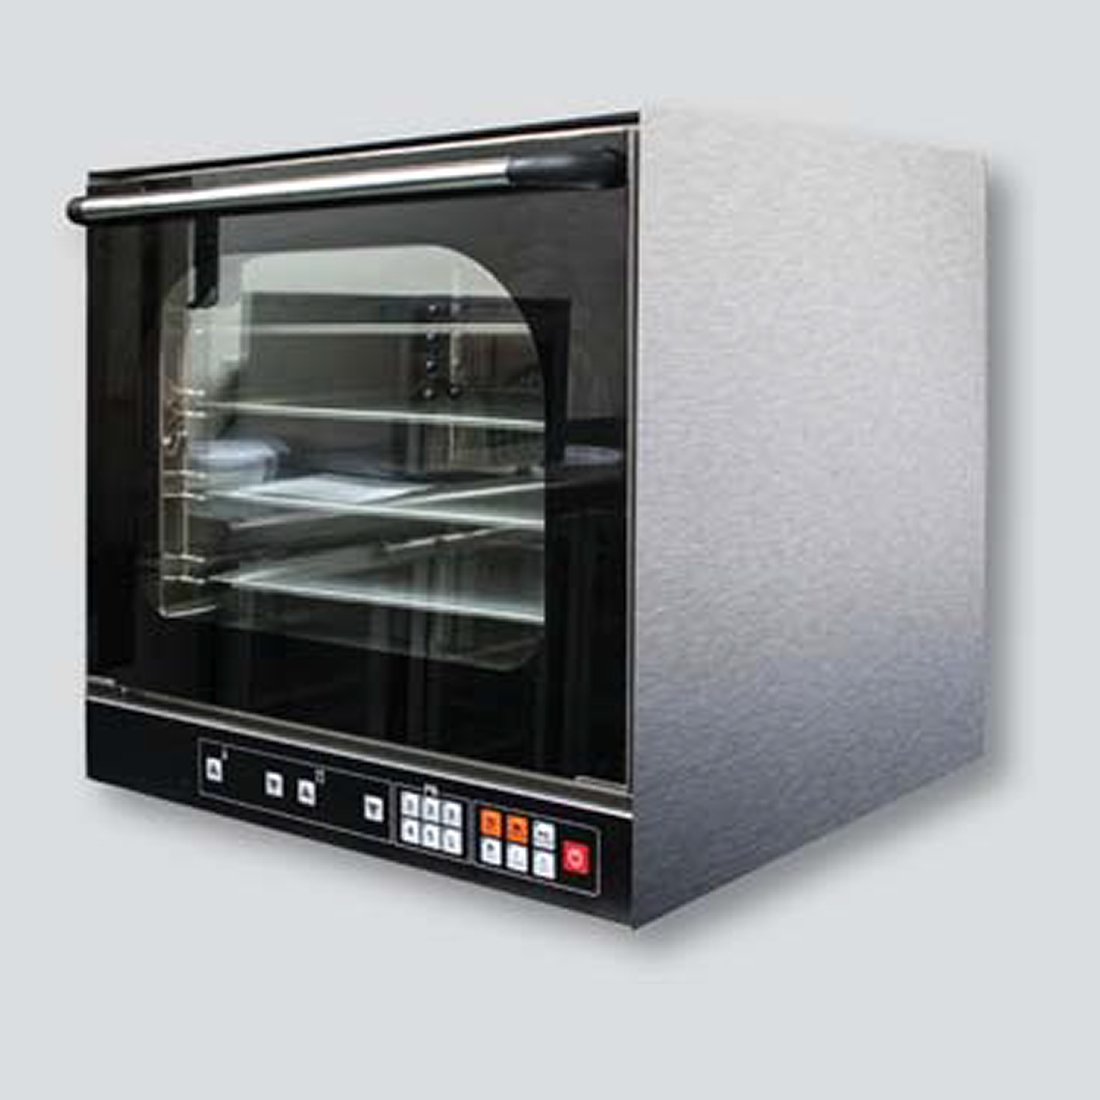 Digital Convection Oven with 5 Memories - YSD-4AD